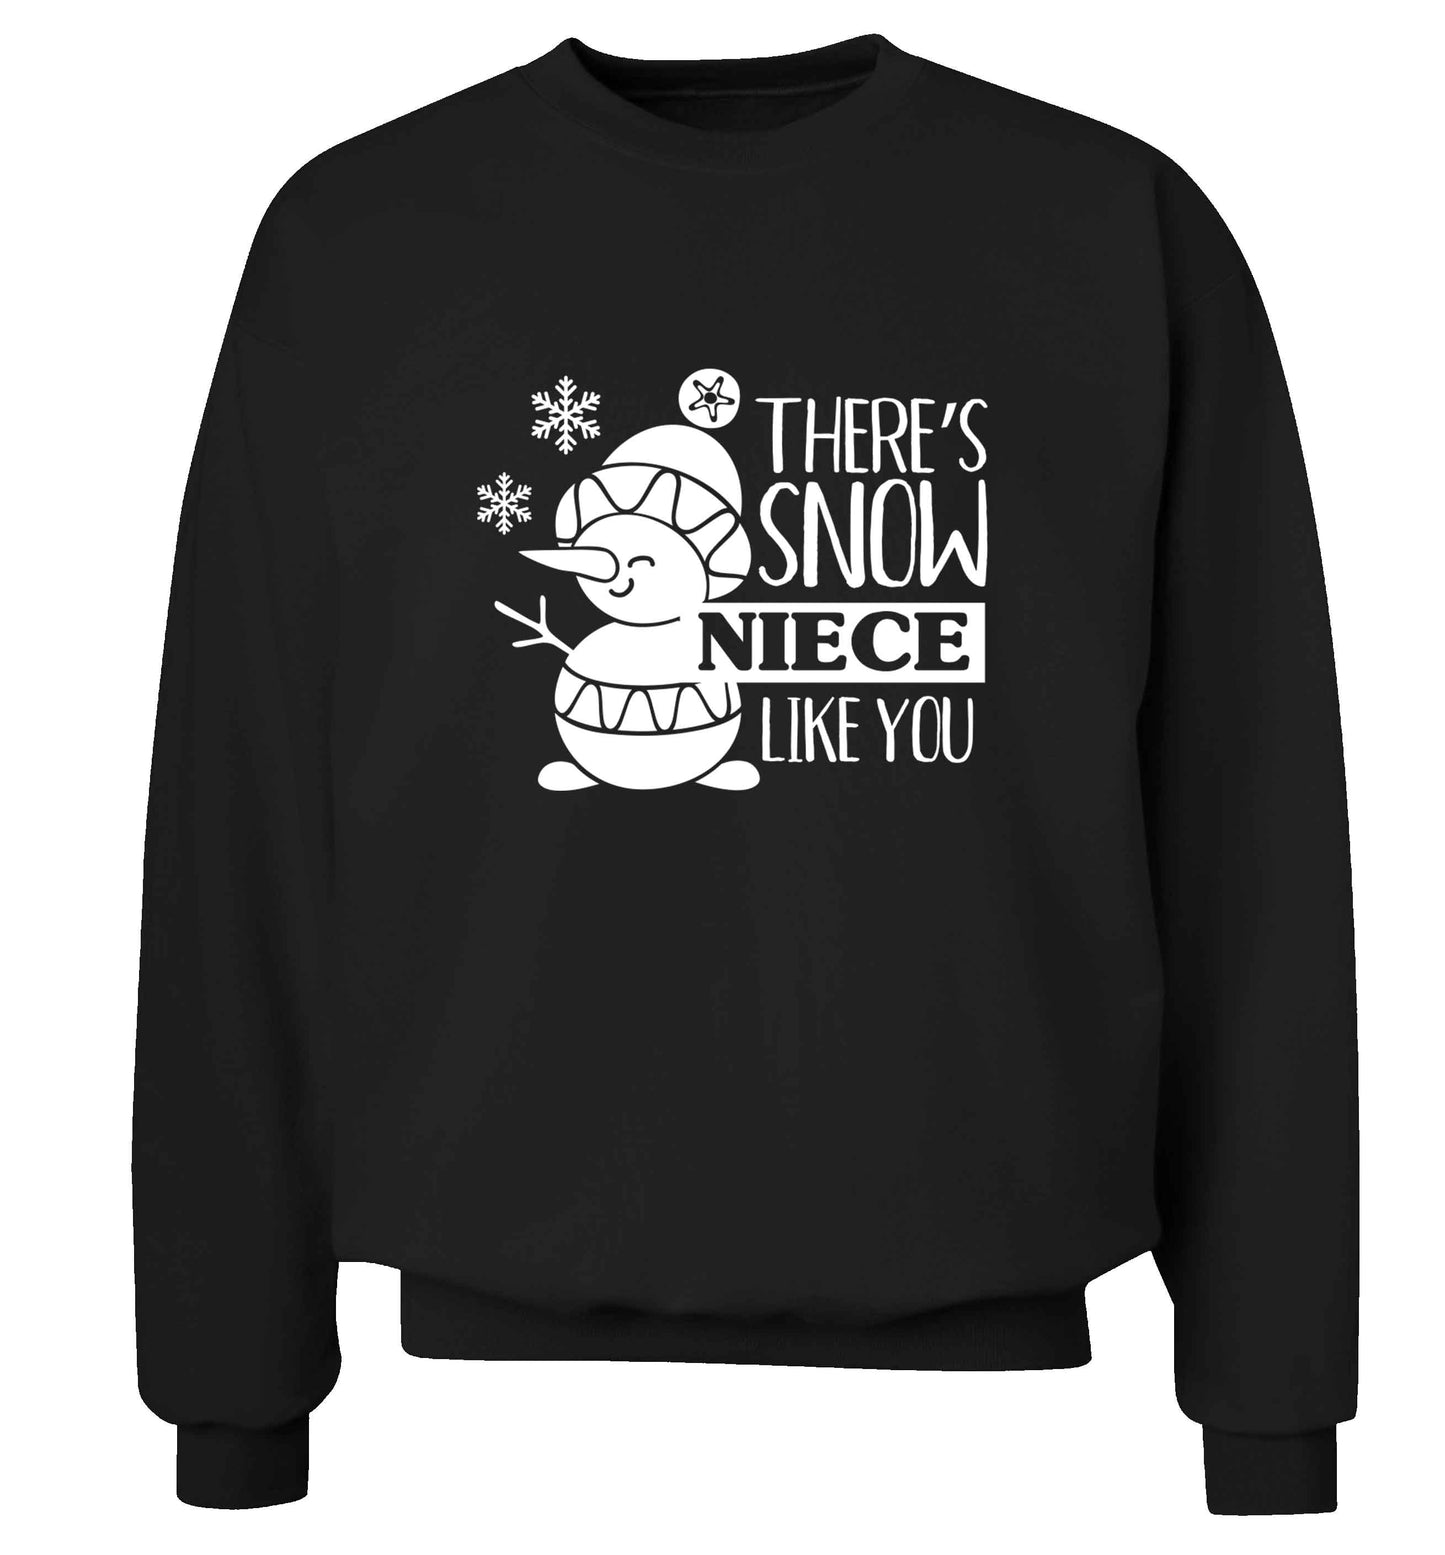 There's snow niece like you adult's unisex black sweater 2XL